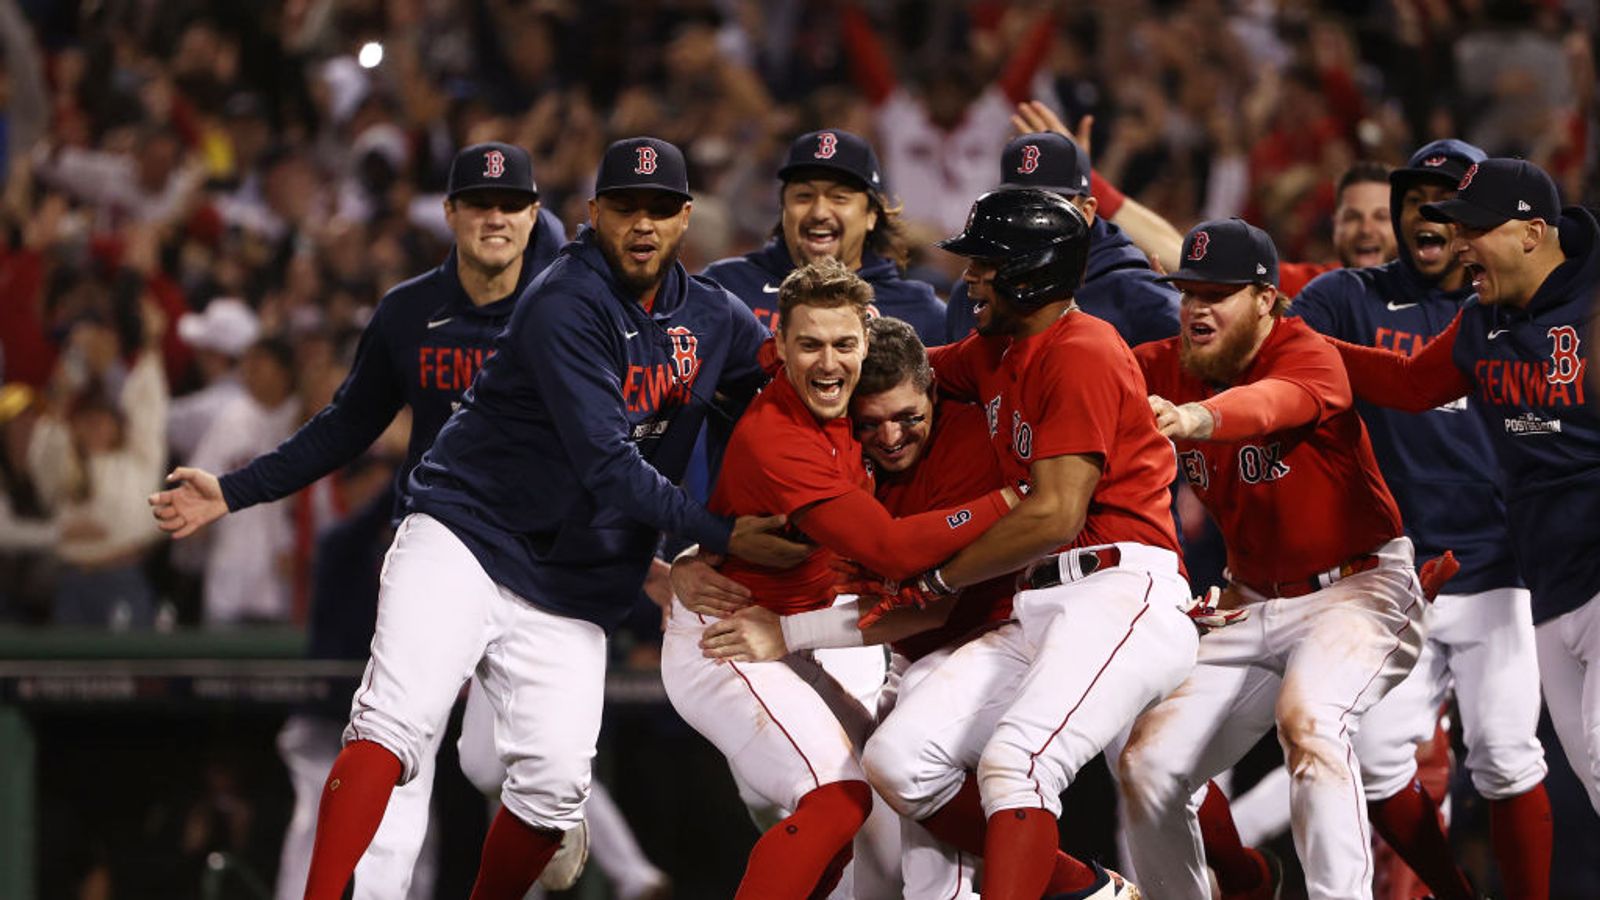 McAdam: Red Sox season rolls on when it could have gone sideways